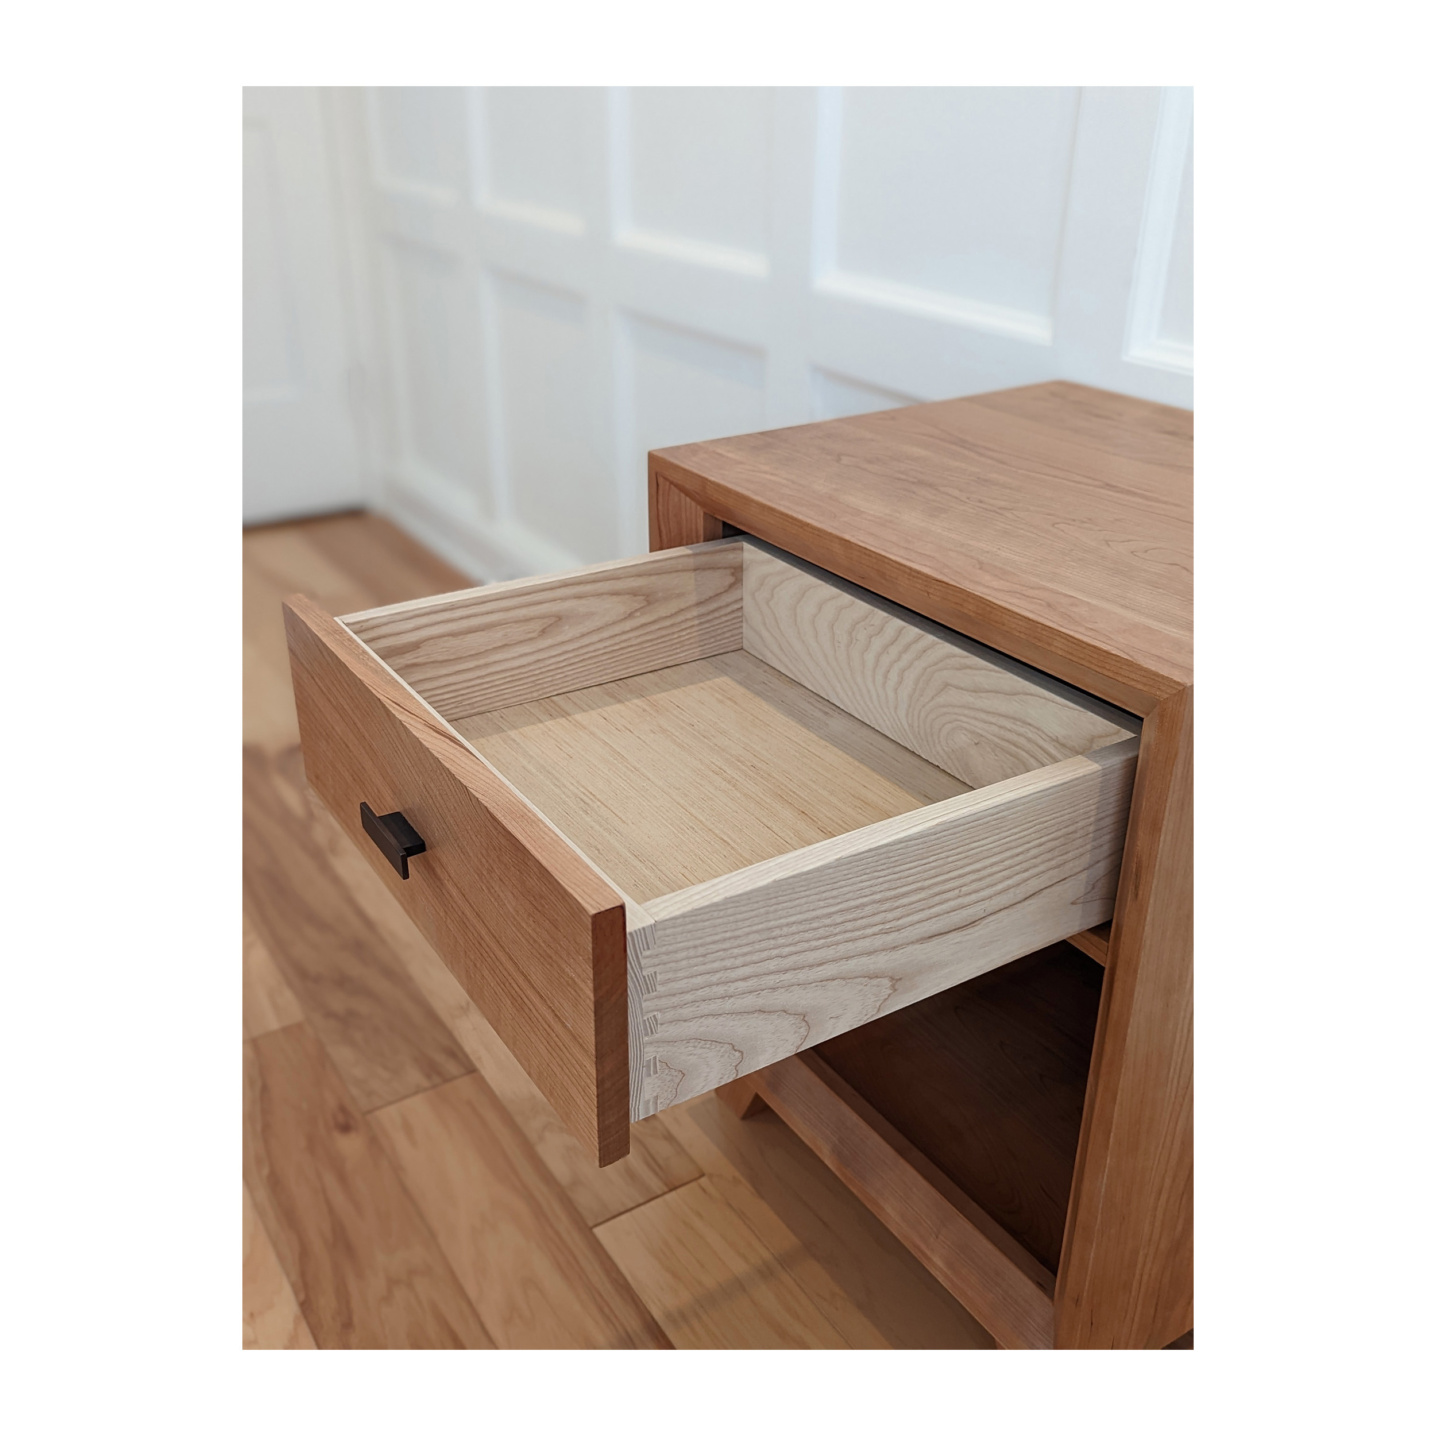 Nightstand with full extension drawers and soft closing drawers